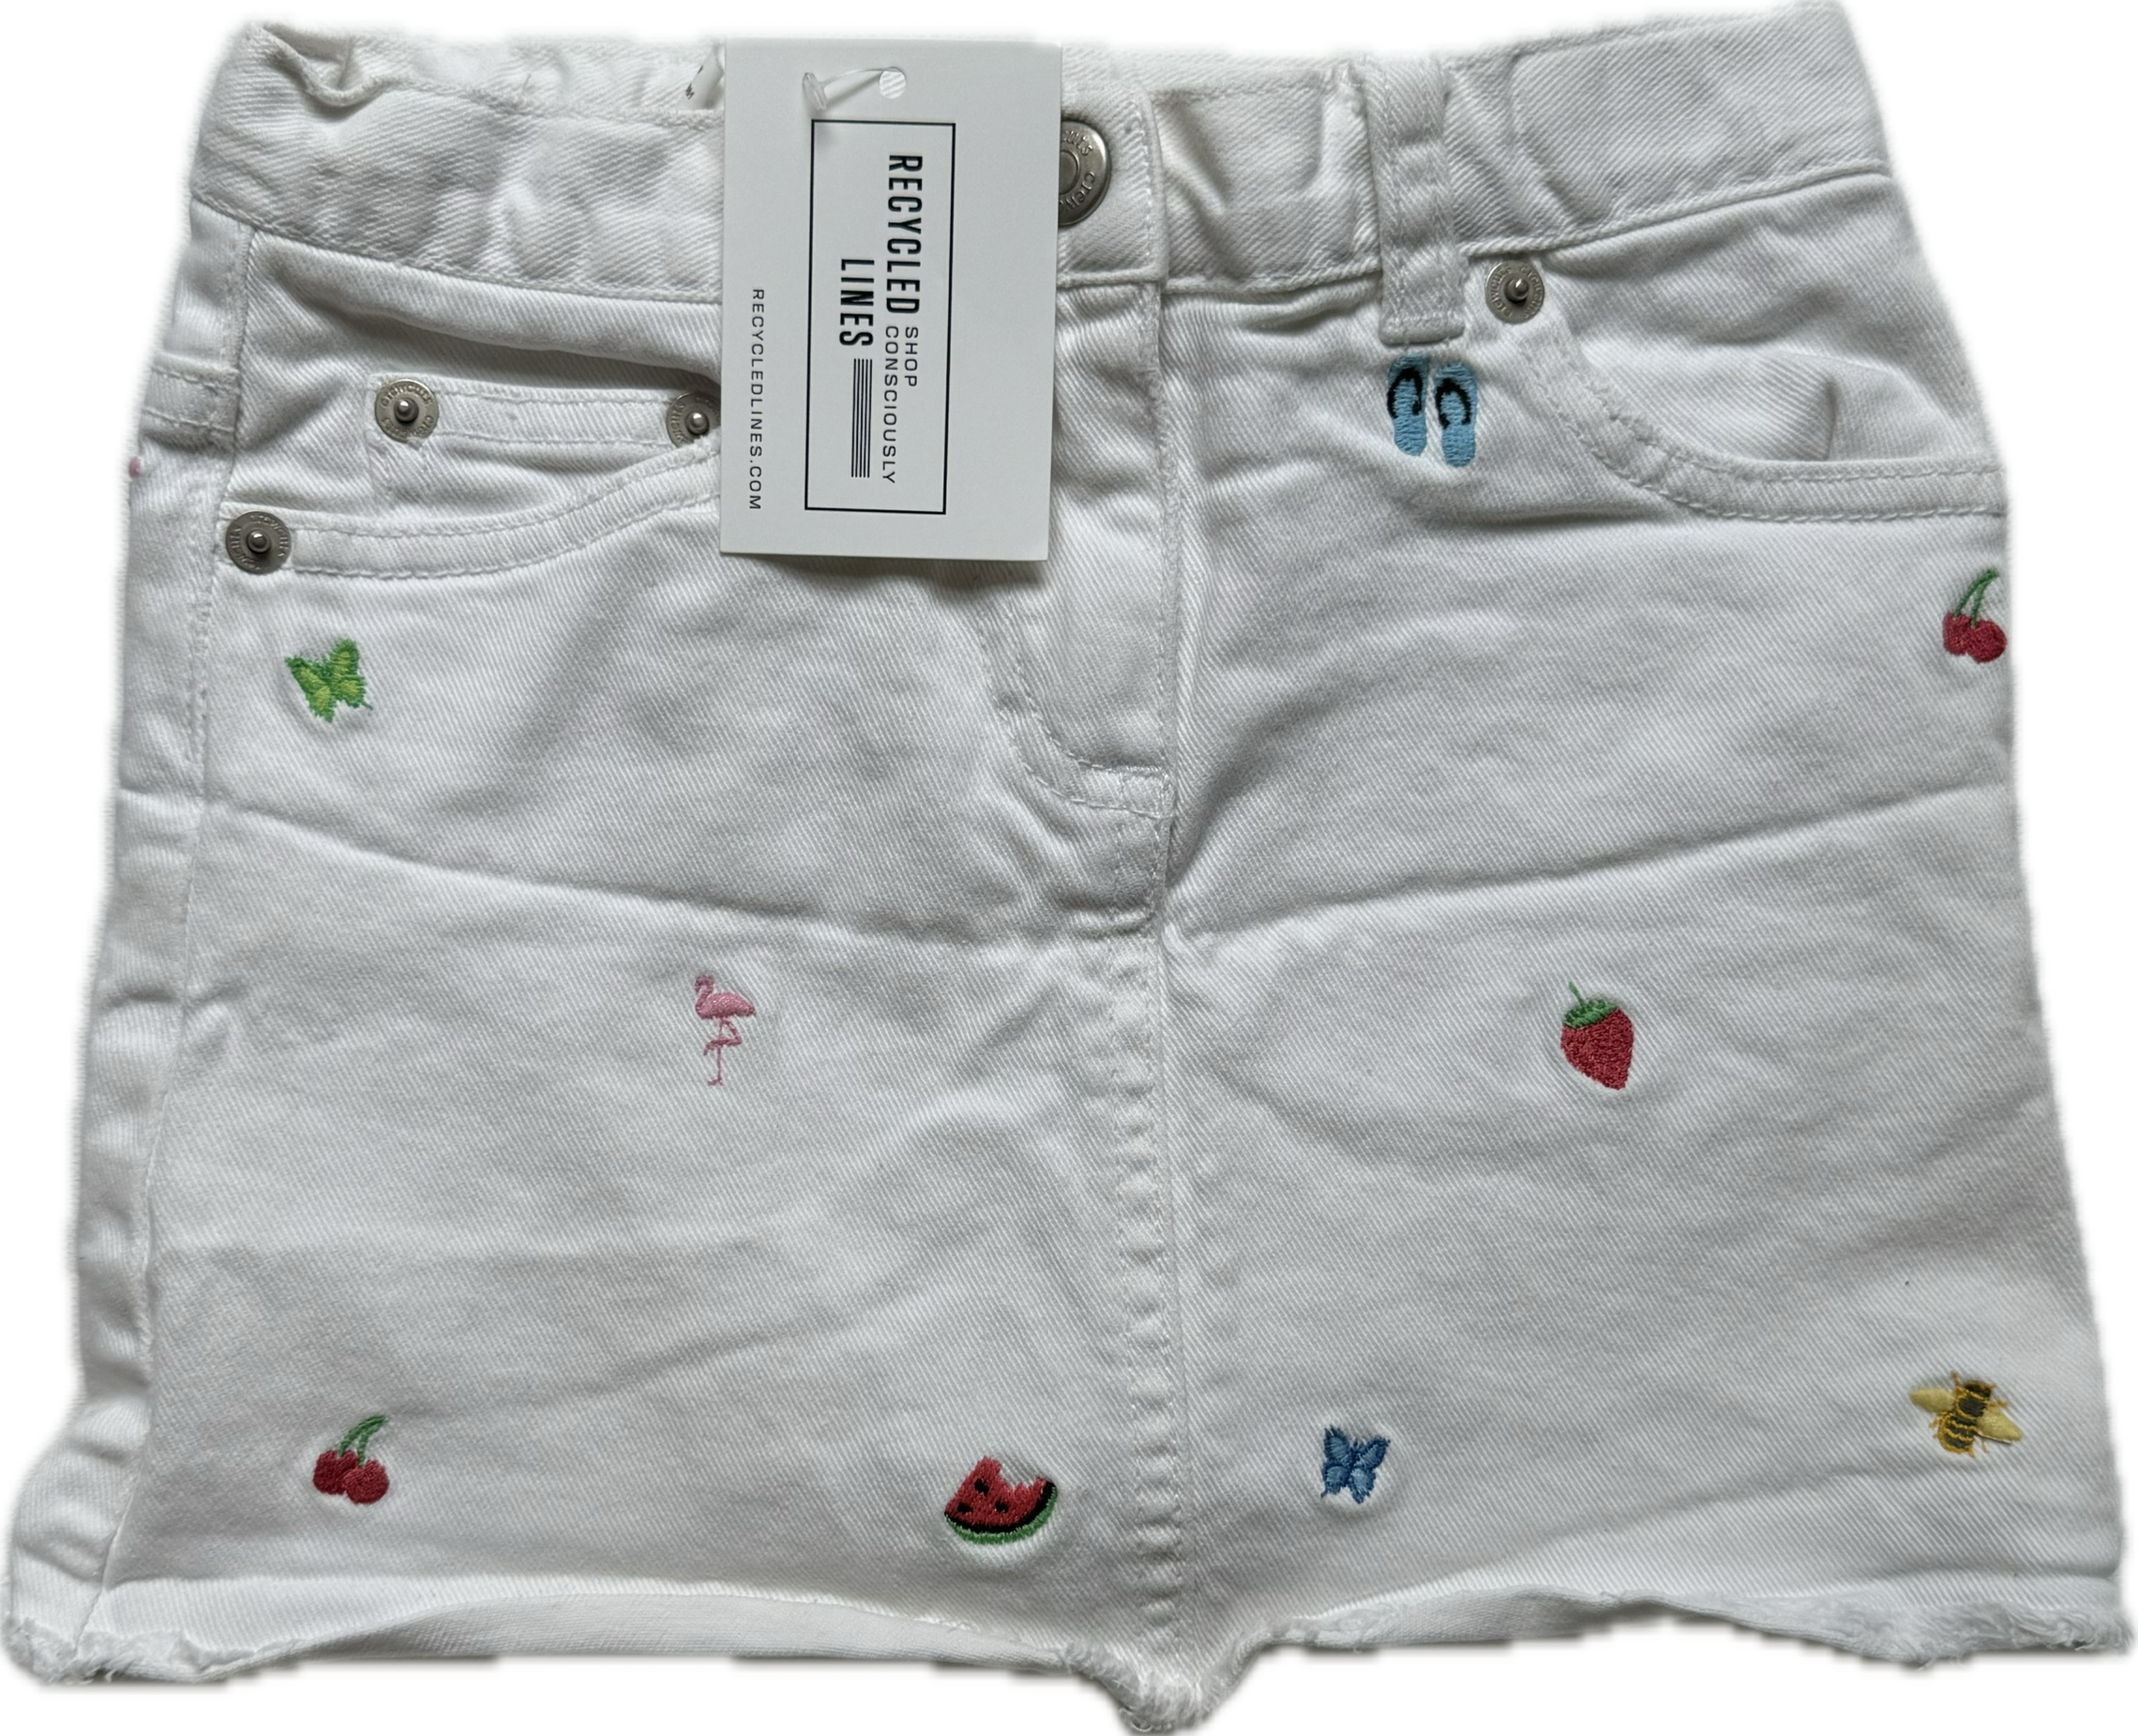 Crewcuts Embroidered Jean Skirt, White Girls Size 5